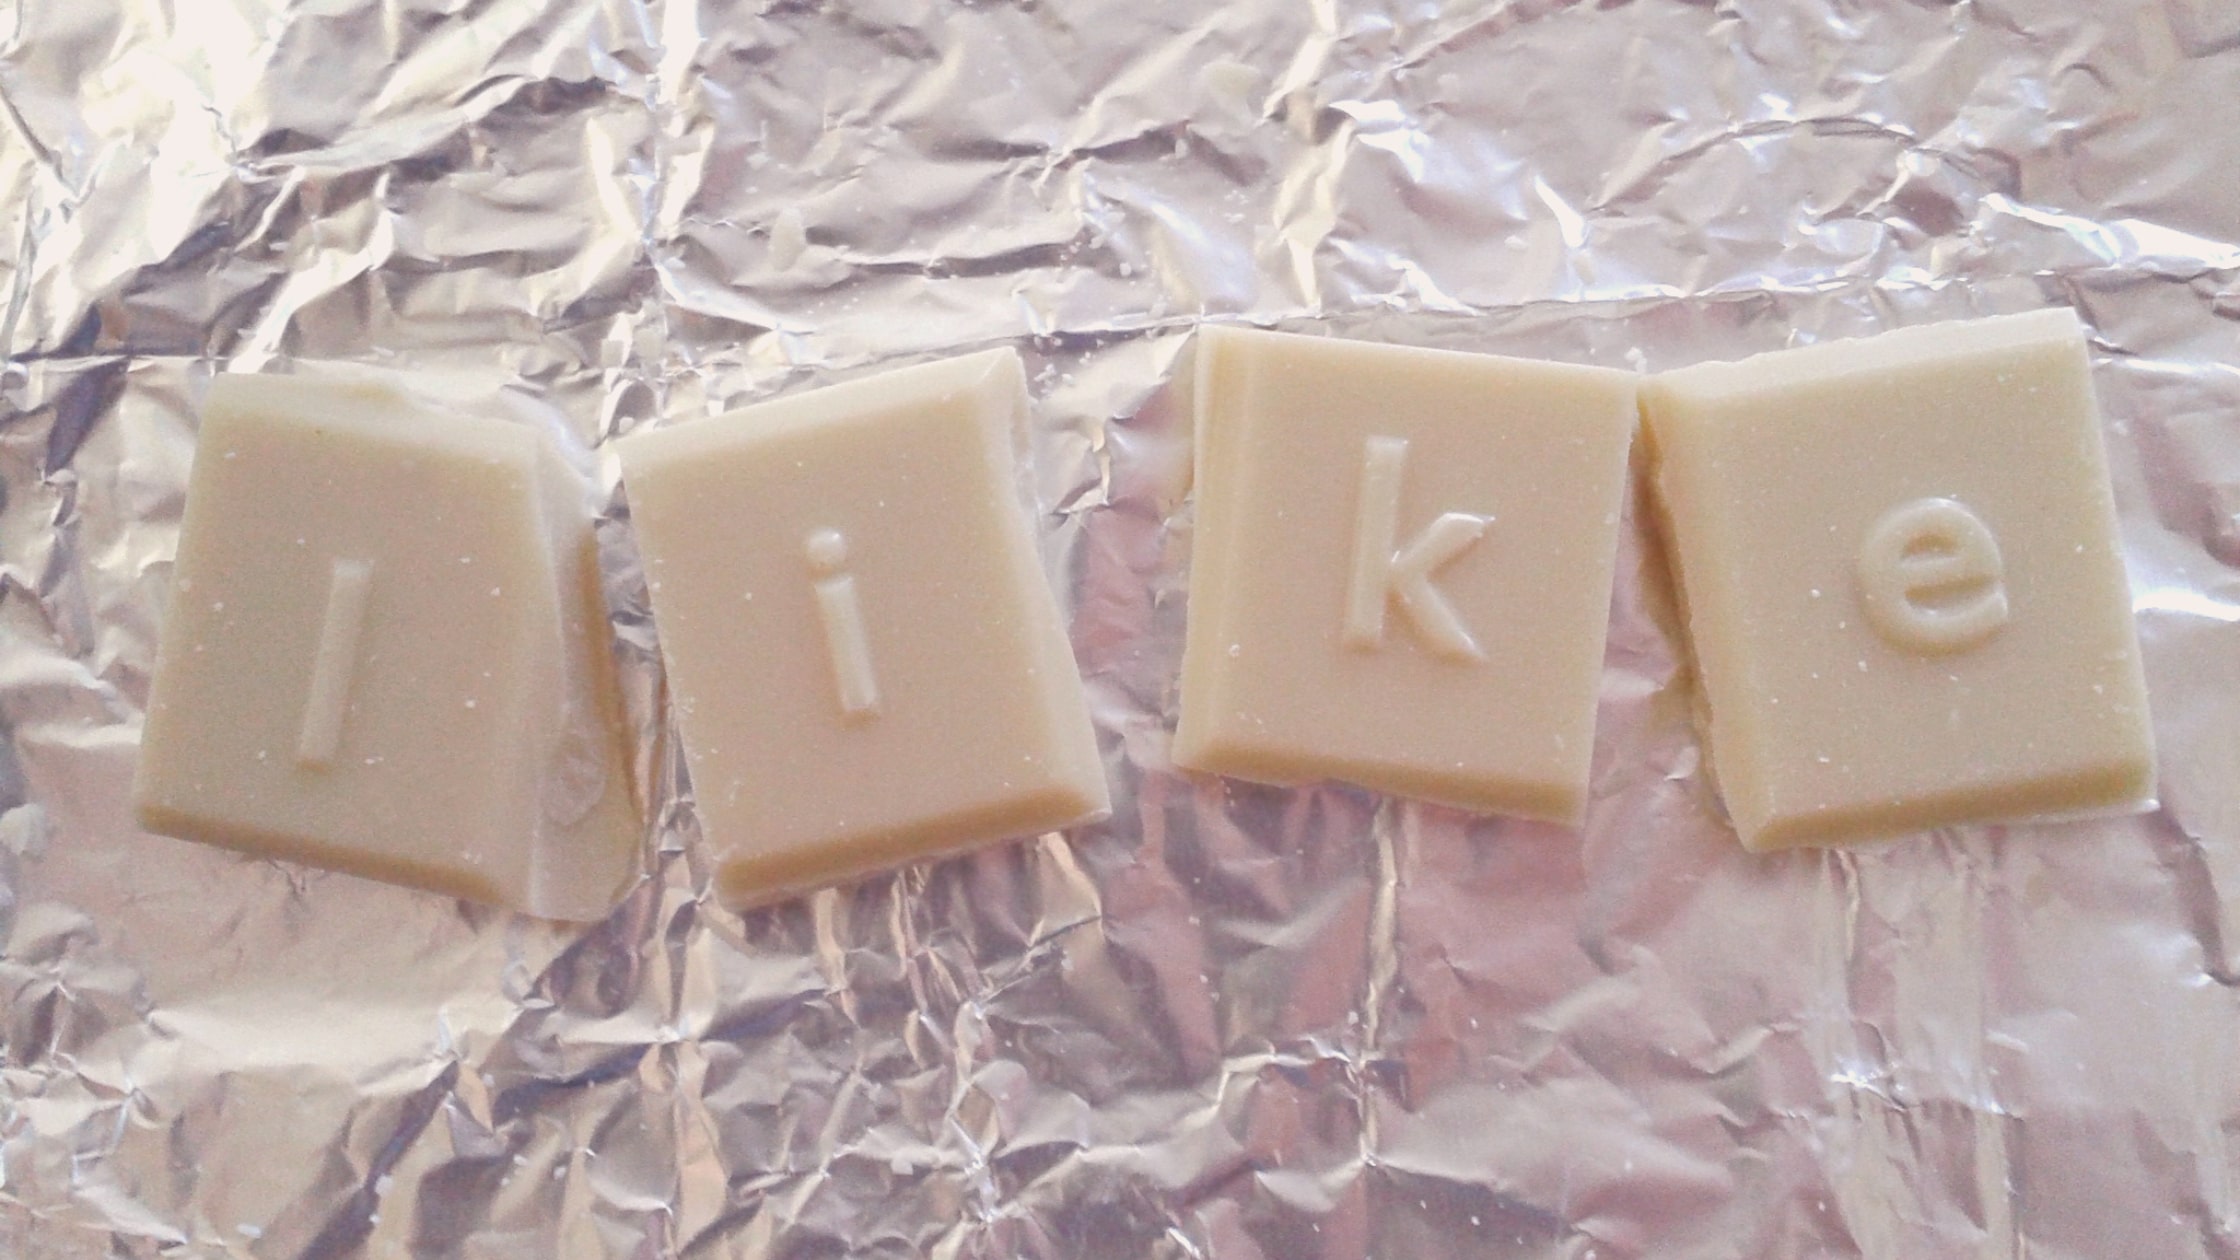 What Is White Chocolate? 3 Misconceptions Vitiating Its Vilification